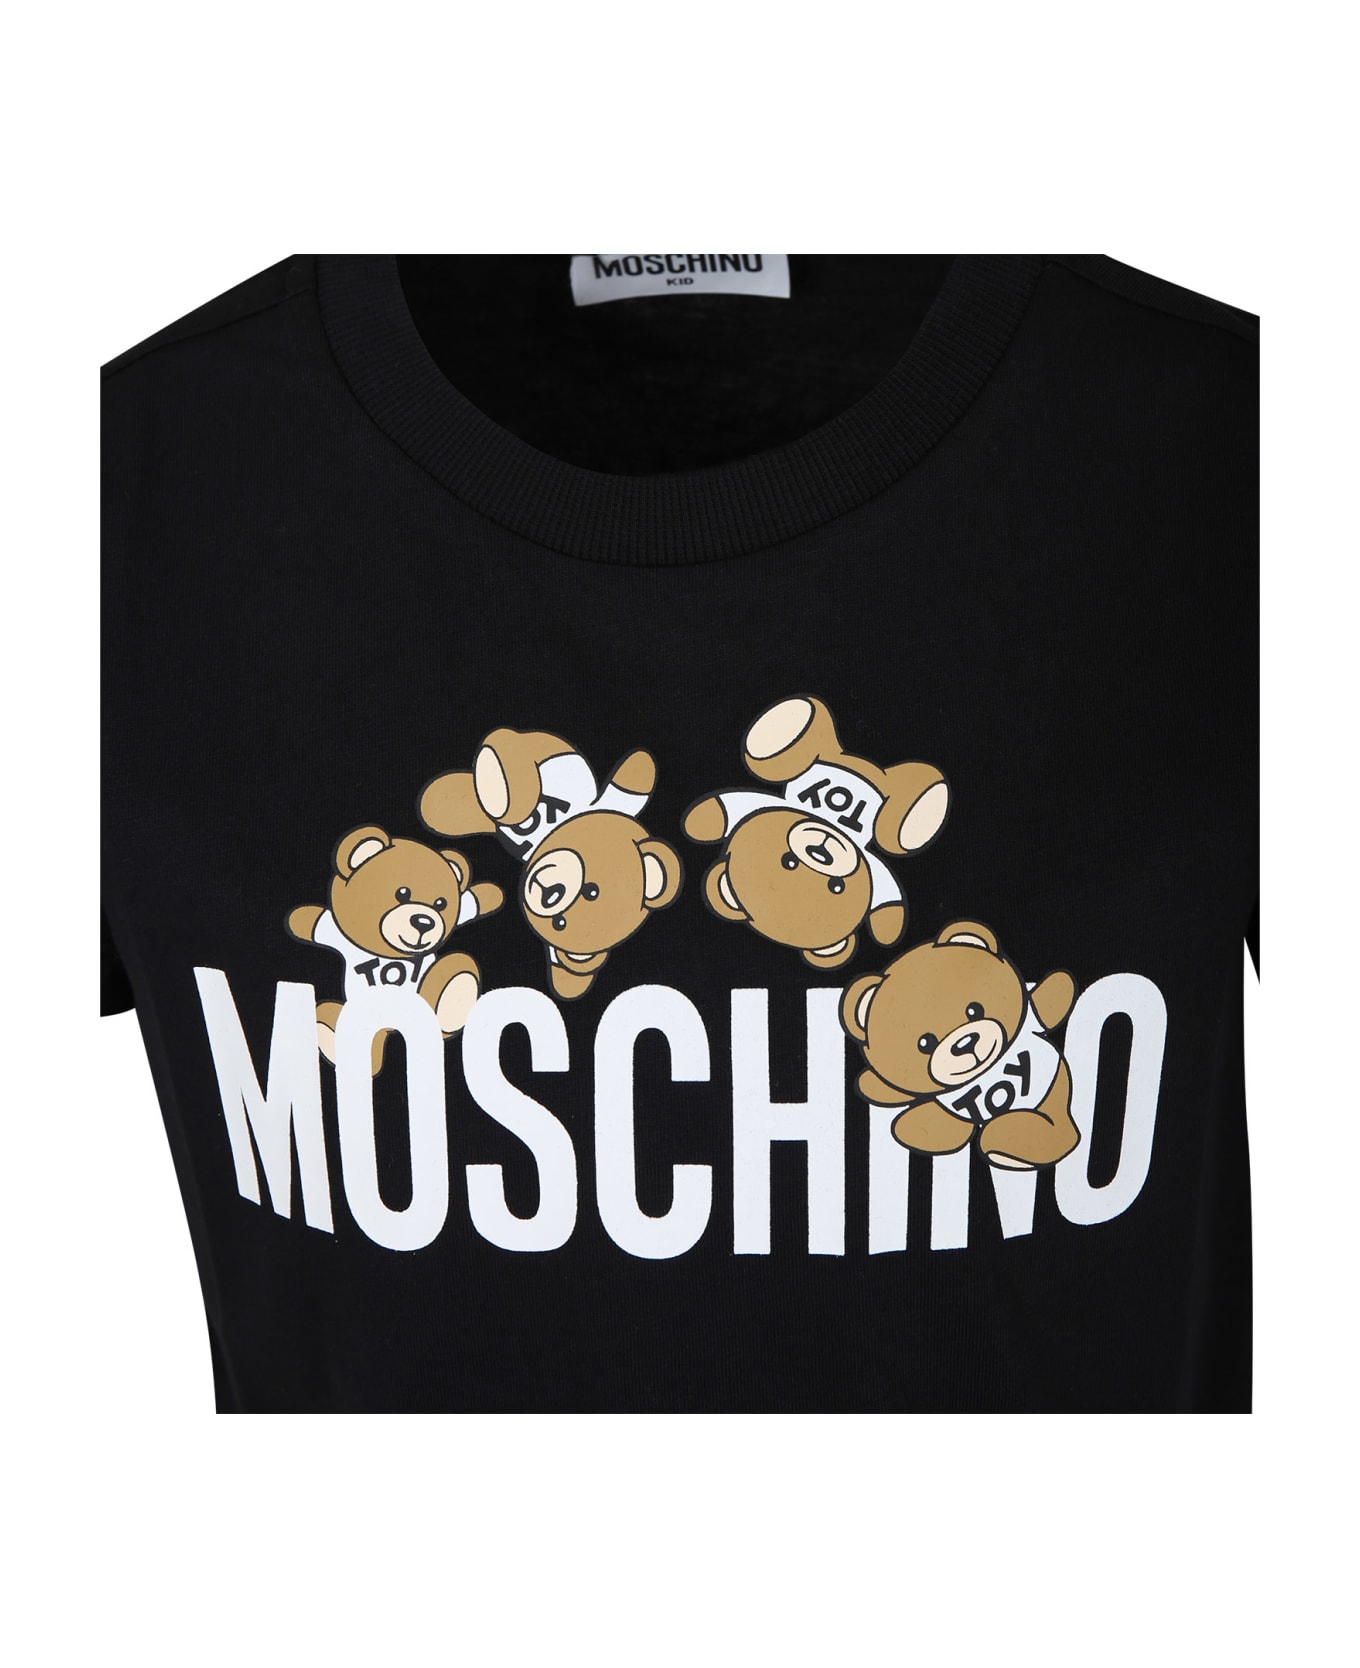 Moschino Black T-shirt For Kids With czapka And Teddy Bear - Nero